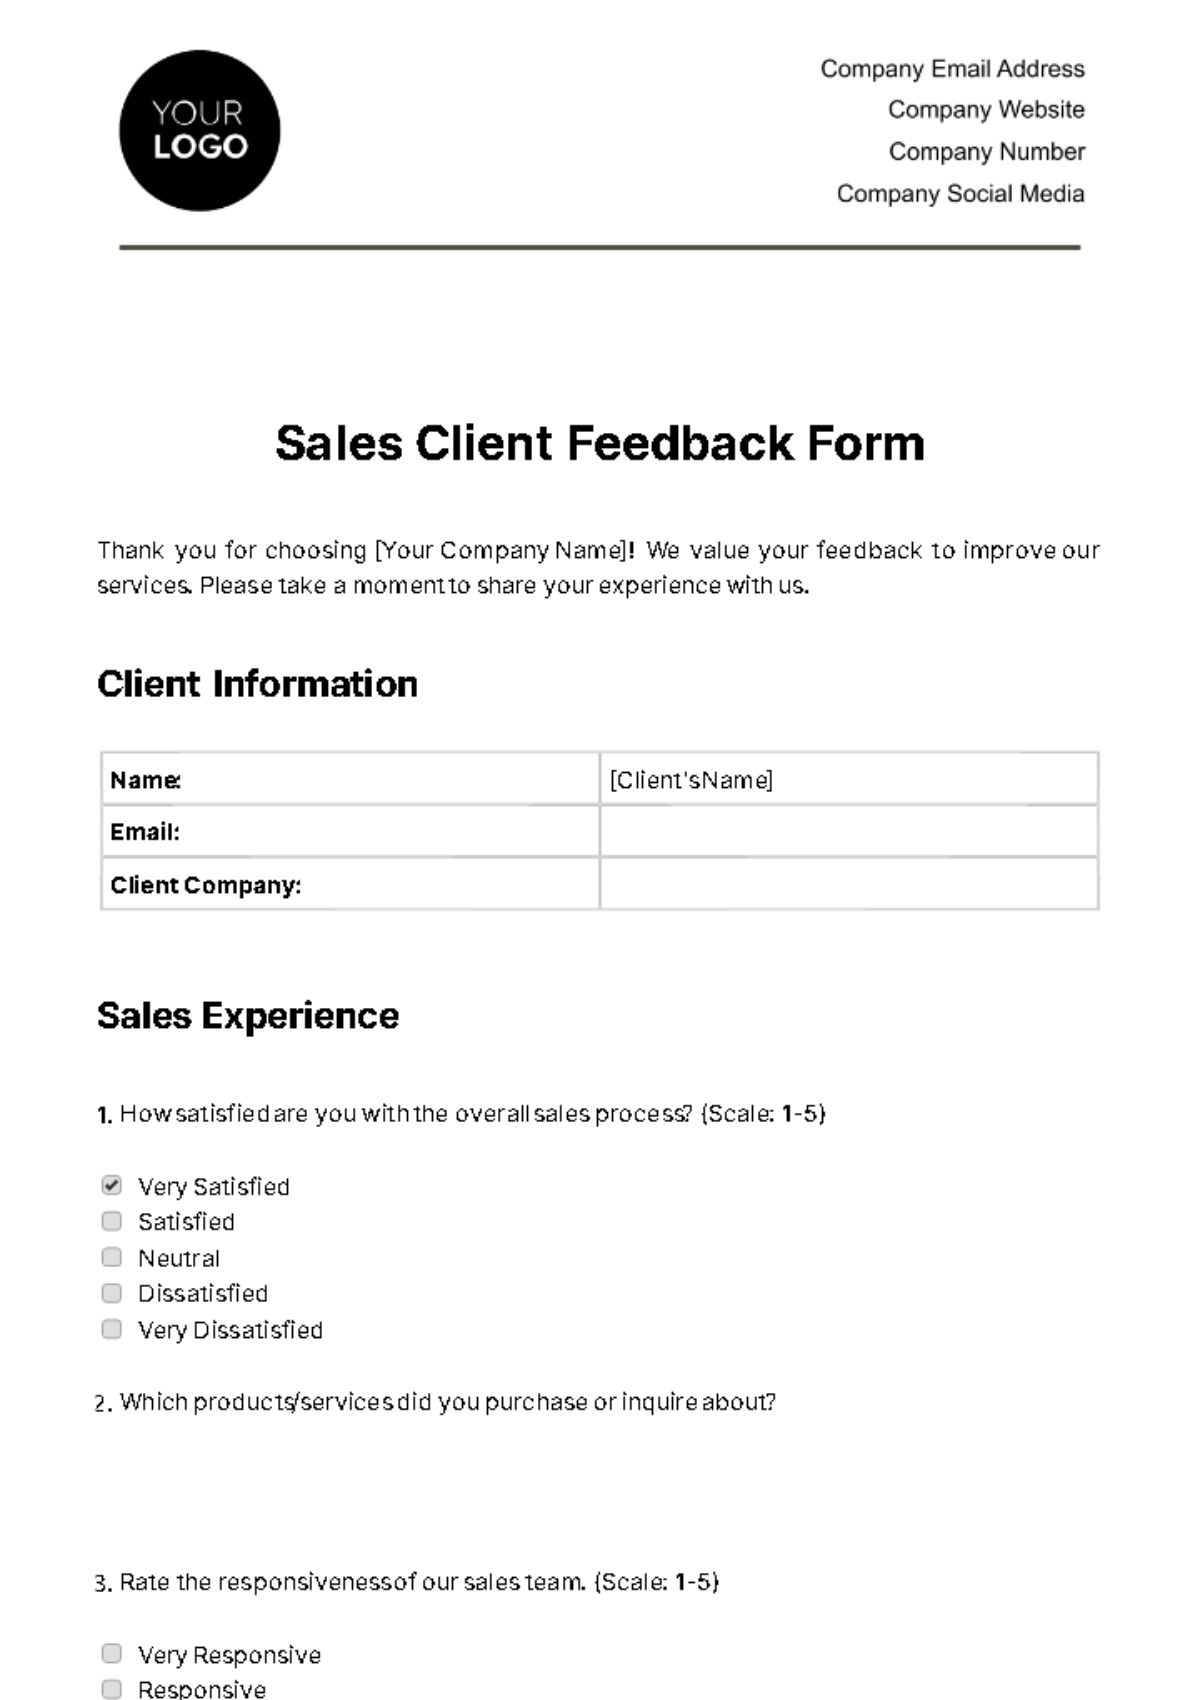 Free Sales Client Feedback Form Template